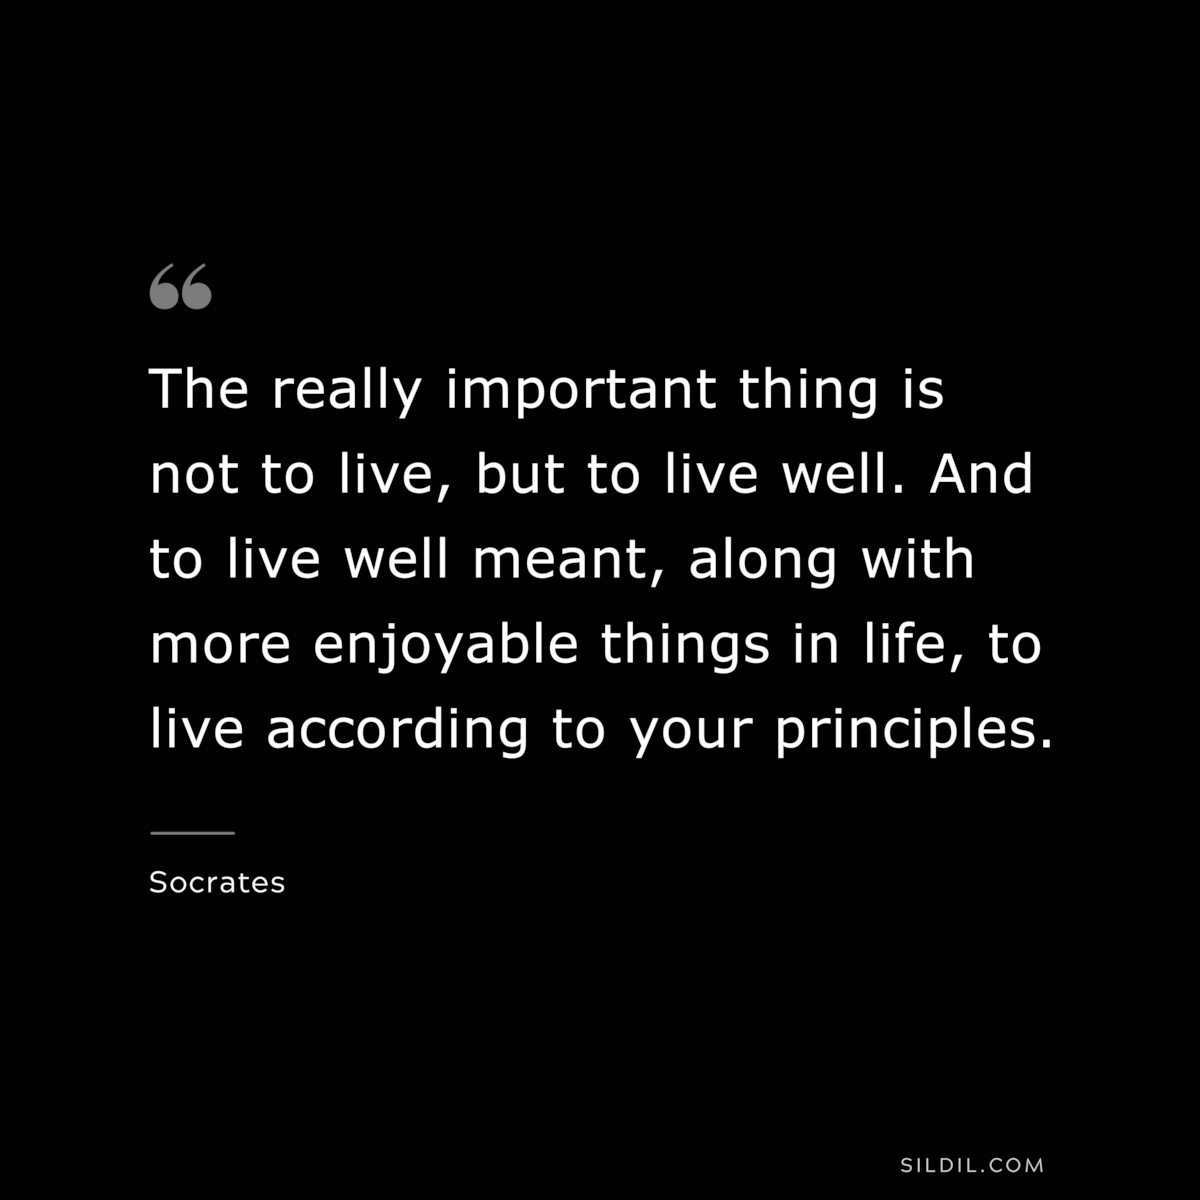 The really important thing is not to live, but to live well. And to live well meant, along with more enjoyable things in life, to live according to your principles. ― Socrates